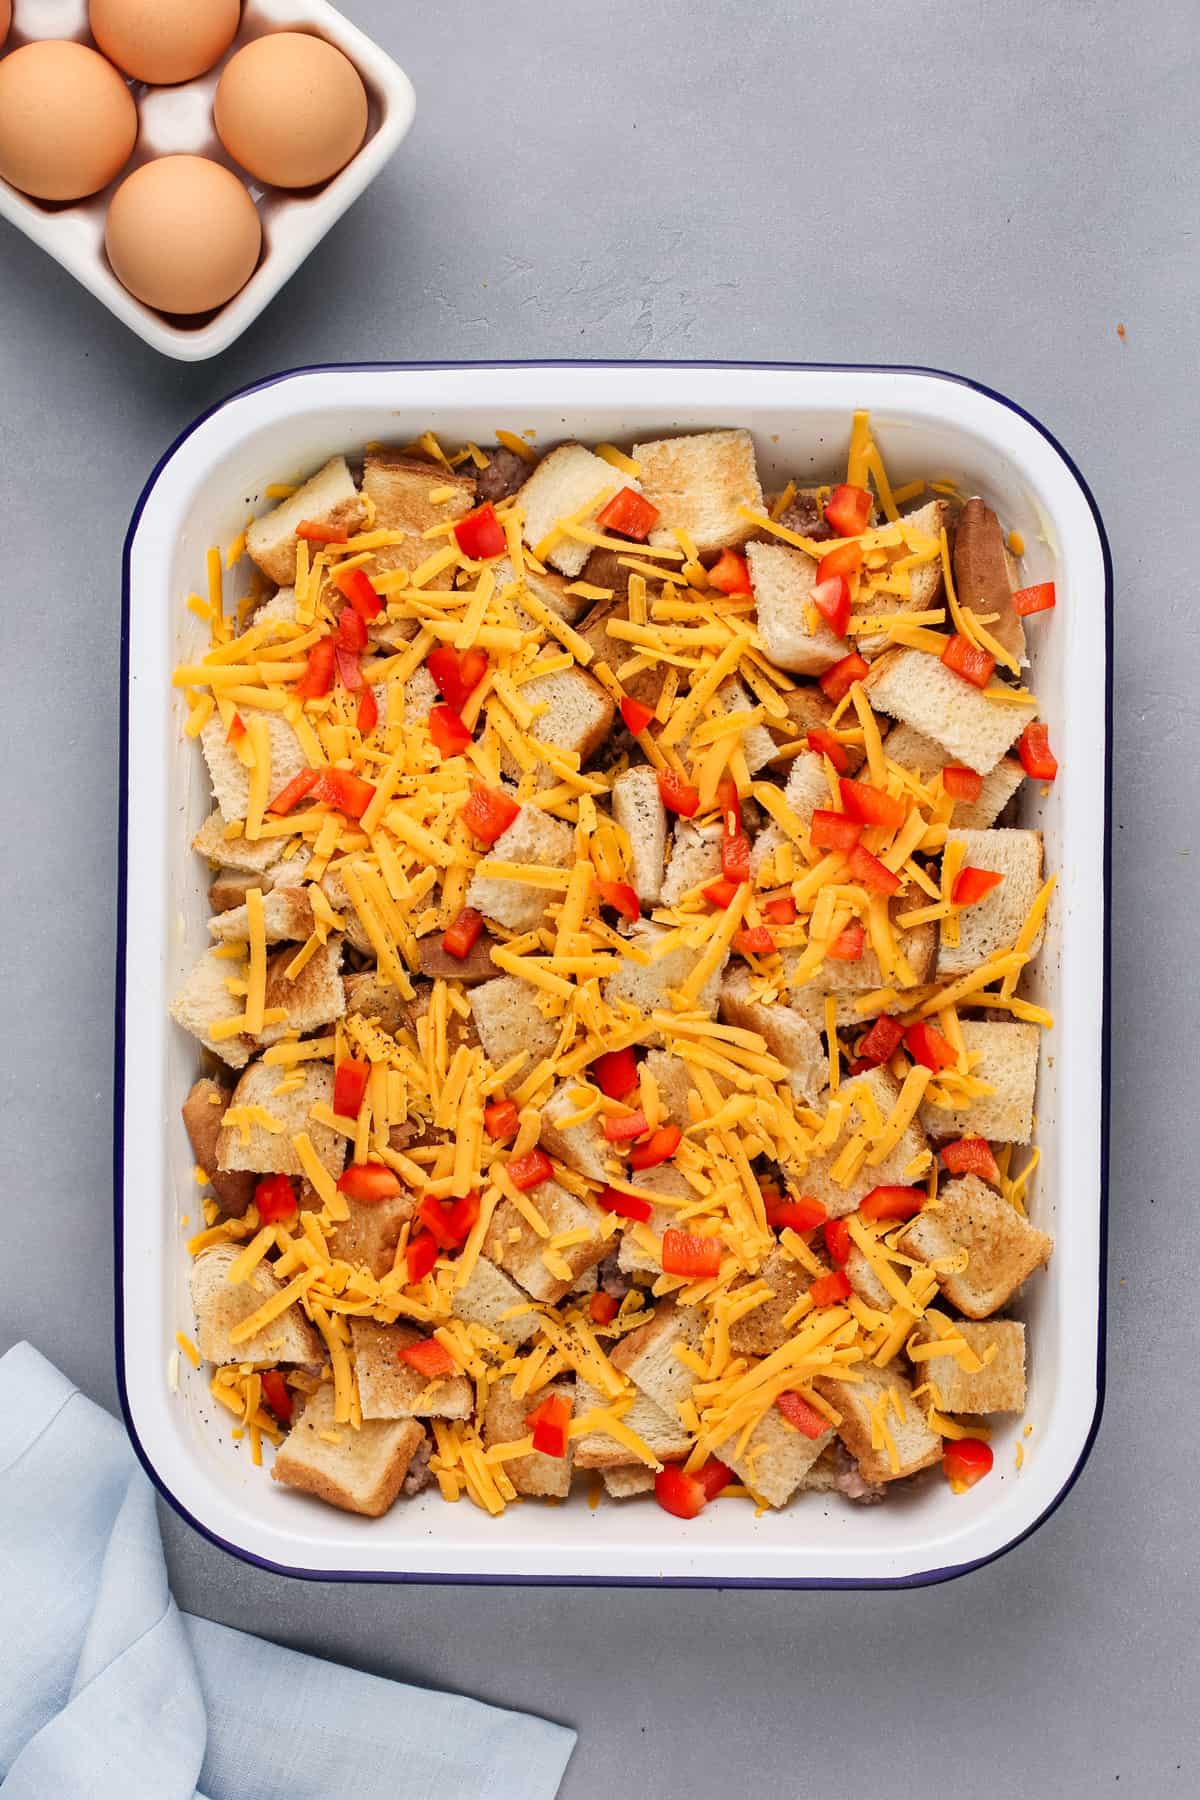 Bread and cheese layered in a baking dish for make-ahead breakfast casserole.